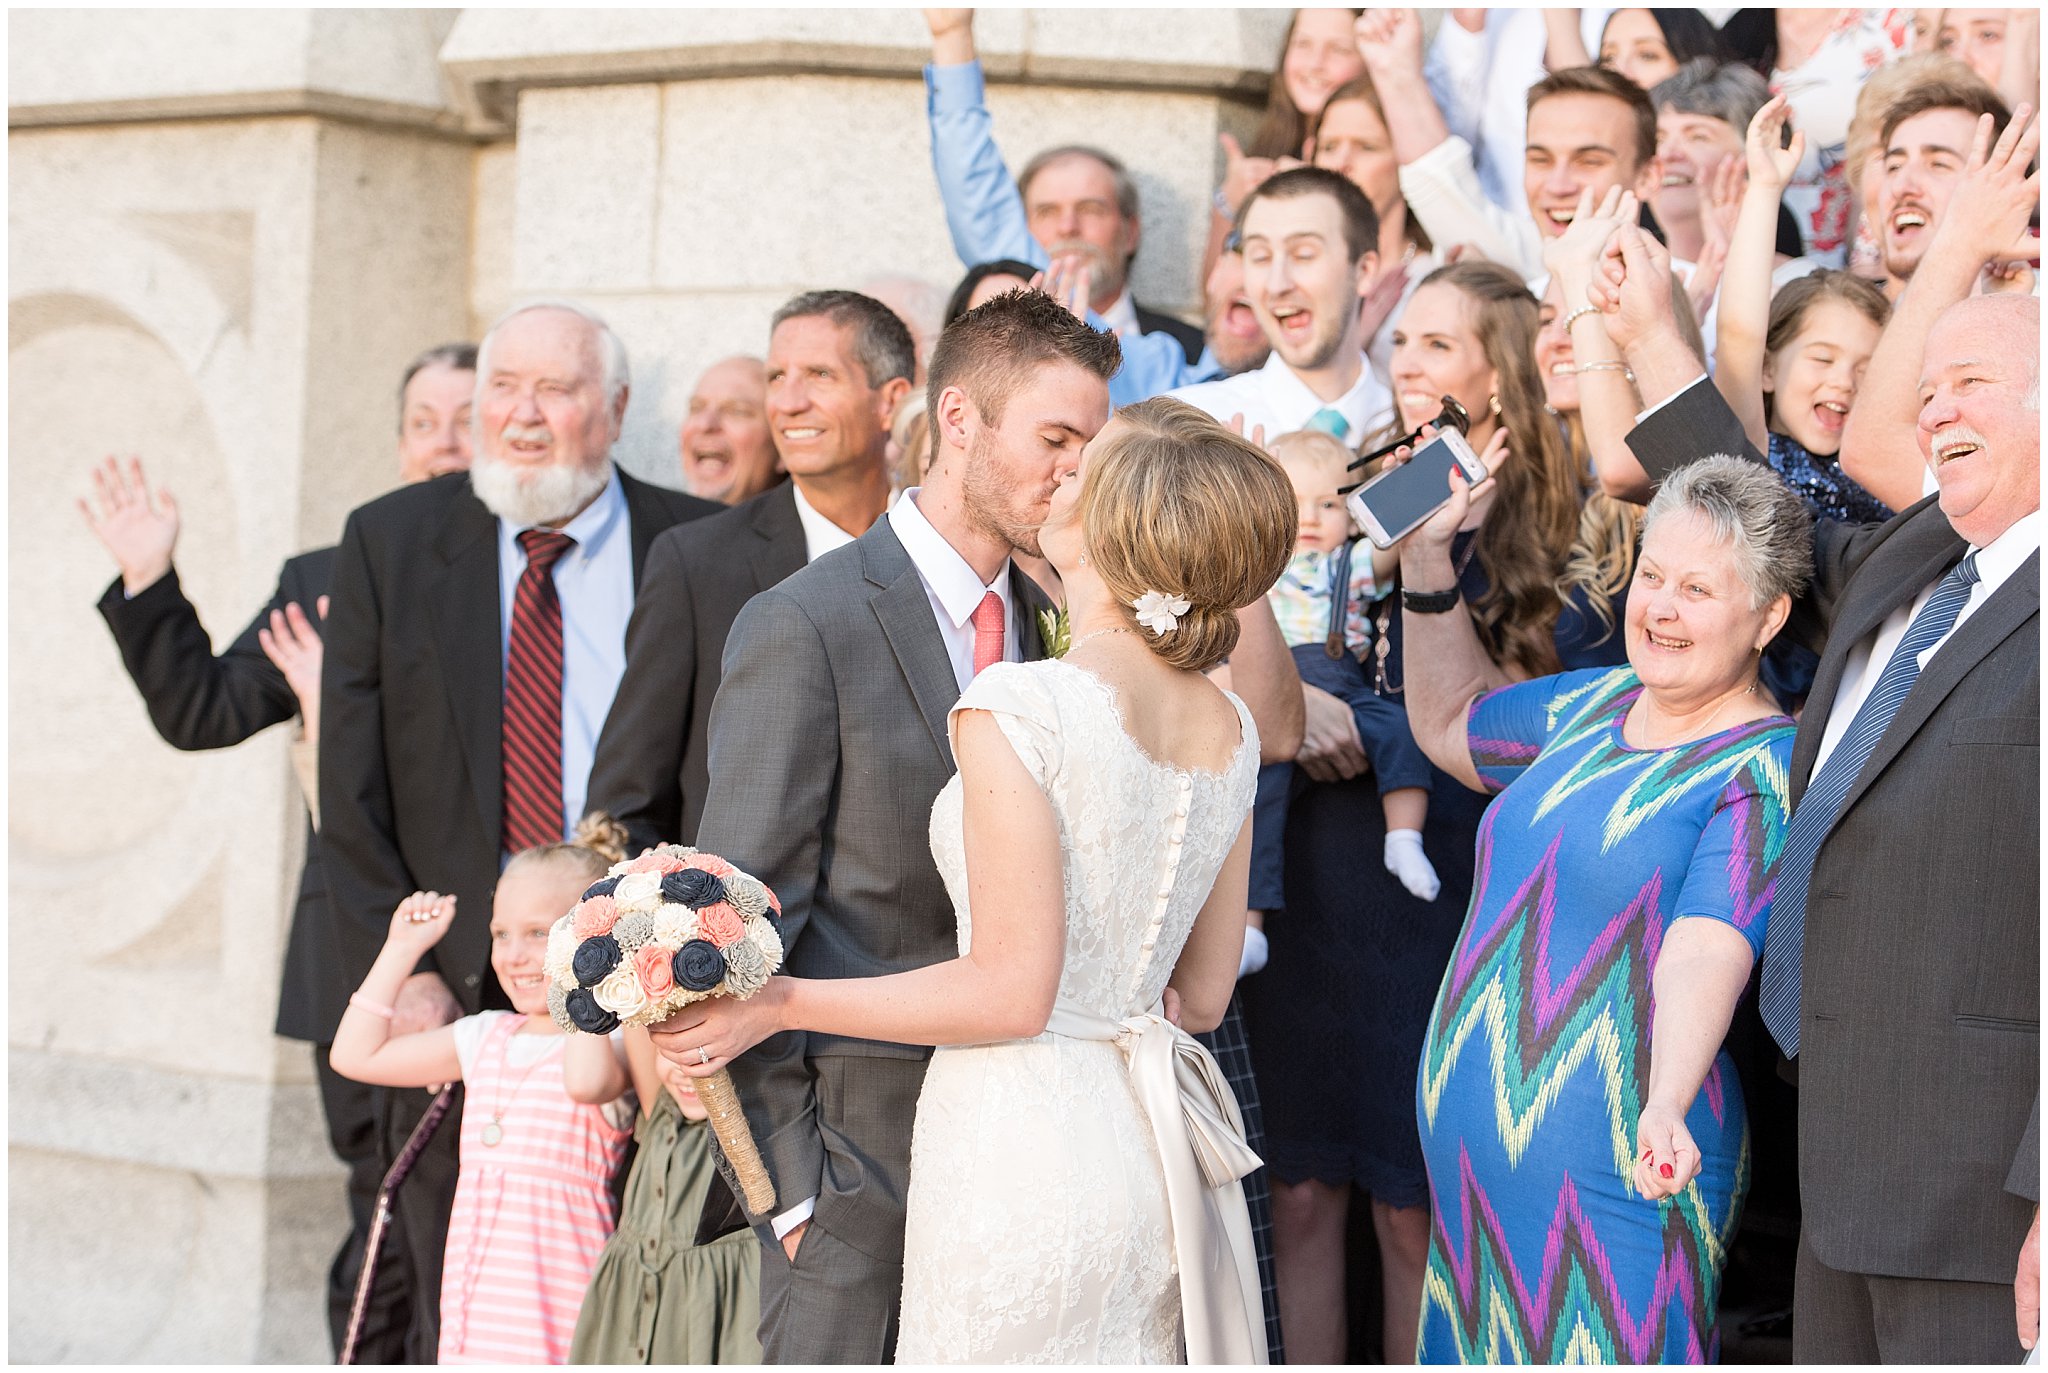 Salt Lake Temple candid group pictures | Coral and grey spring wedding